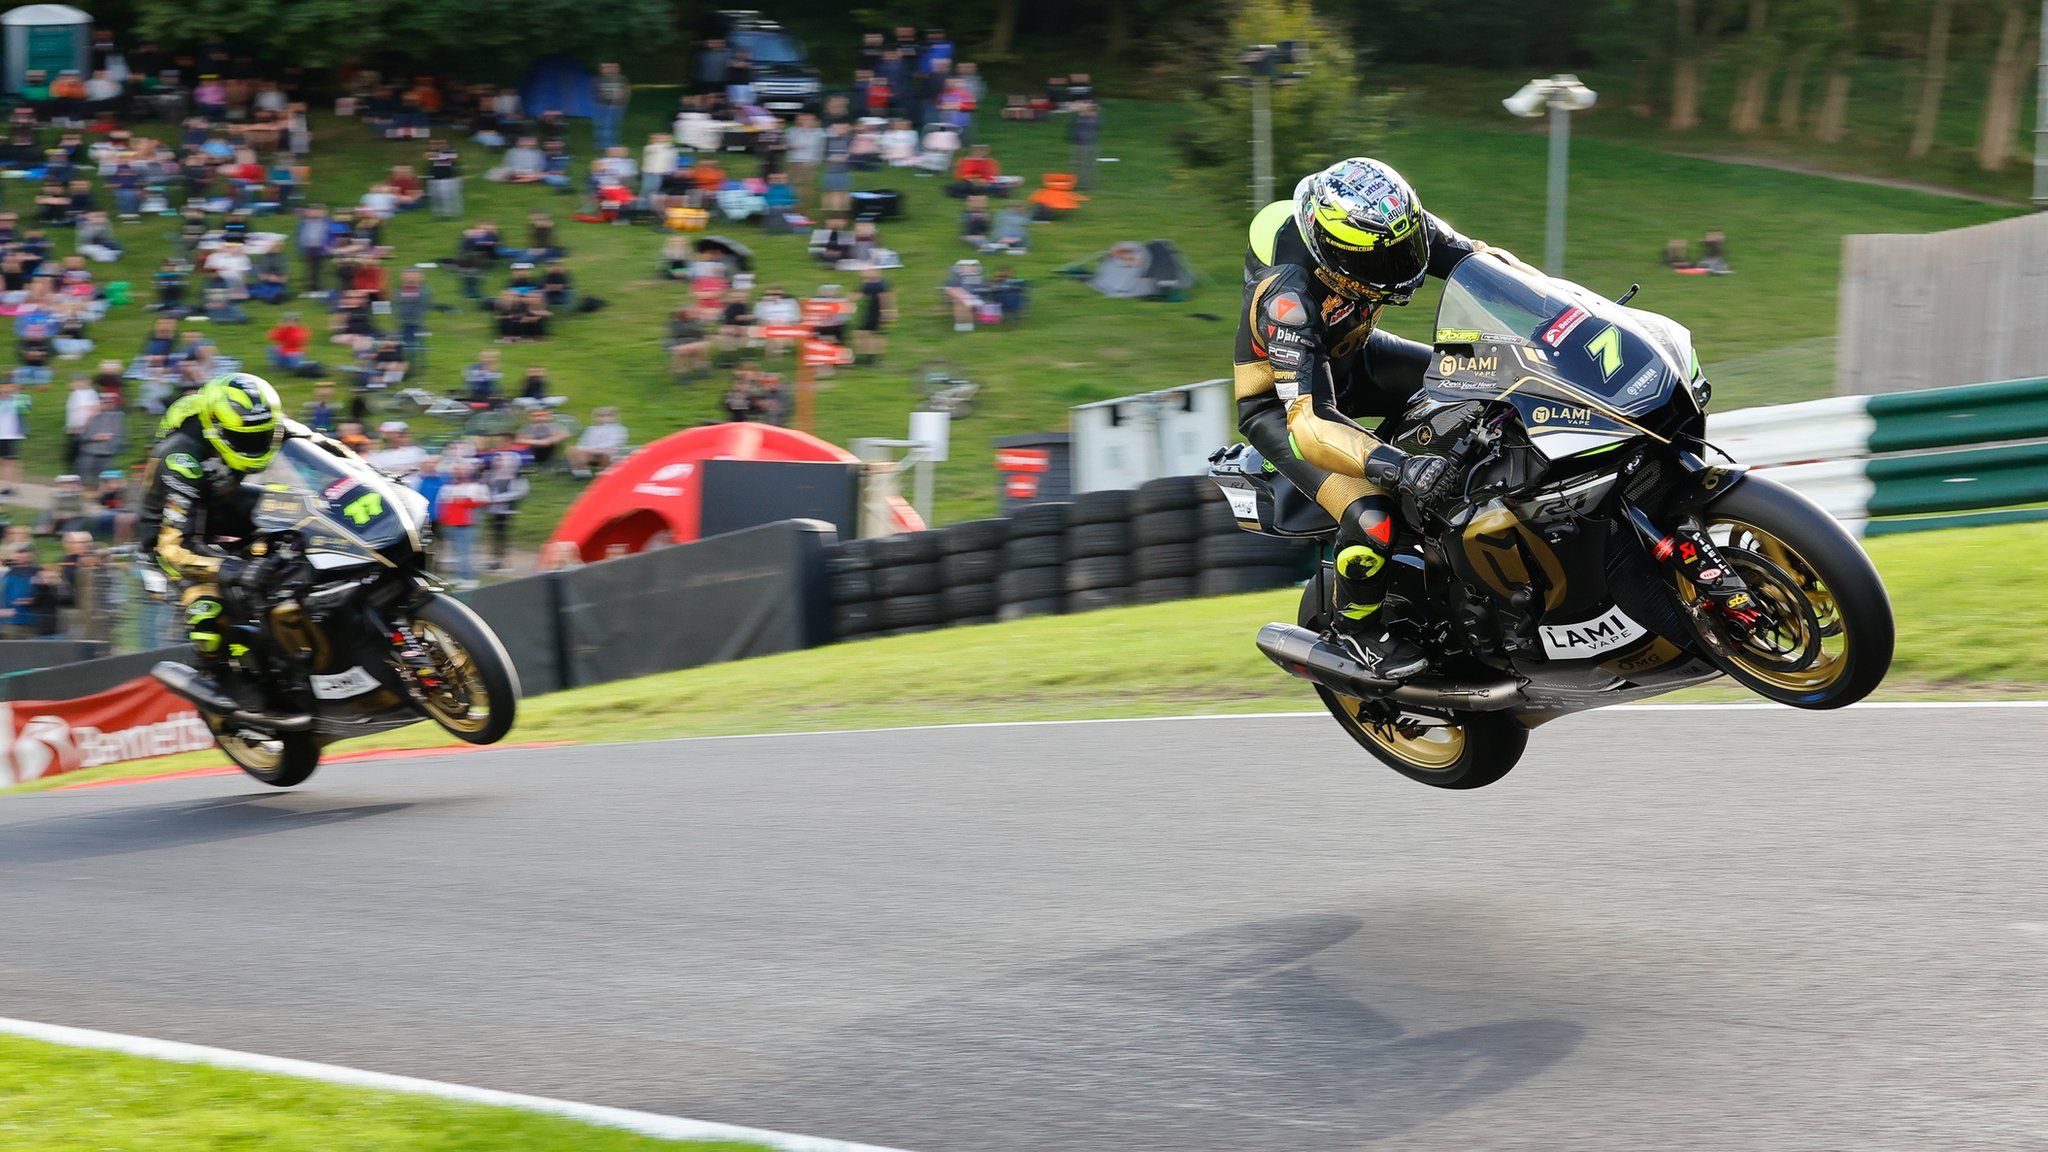 Ryan Vickers and teammate Kyle Ryde in action at Cadwell Park